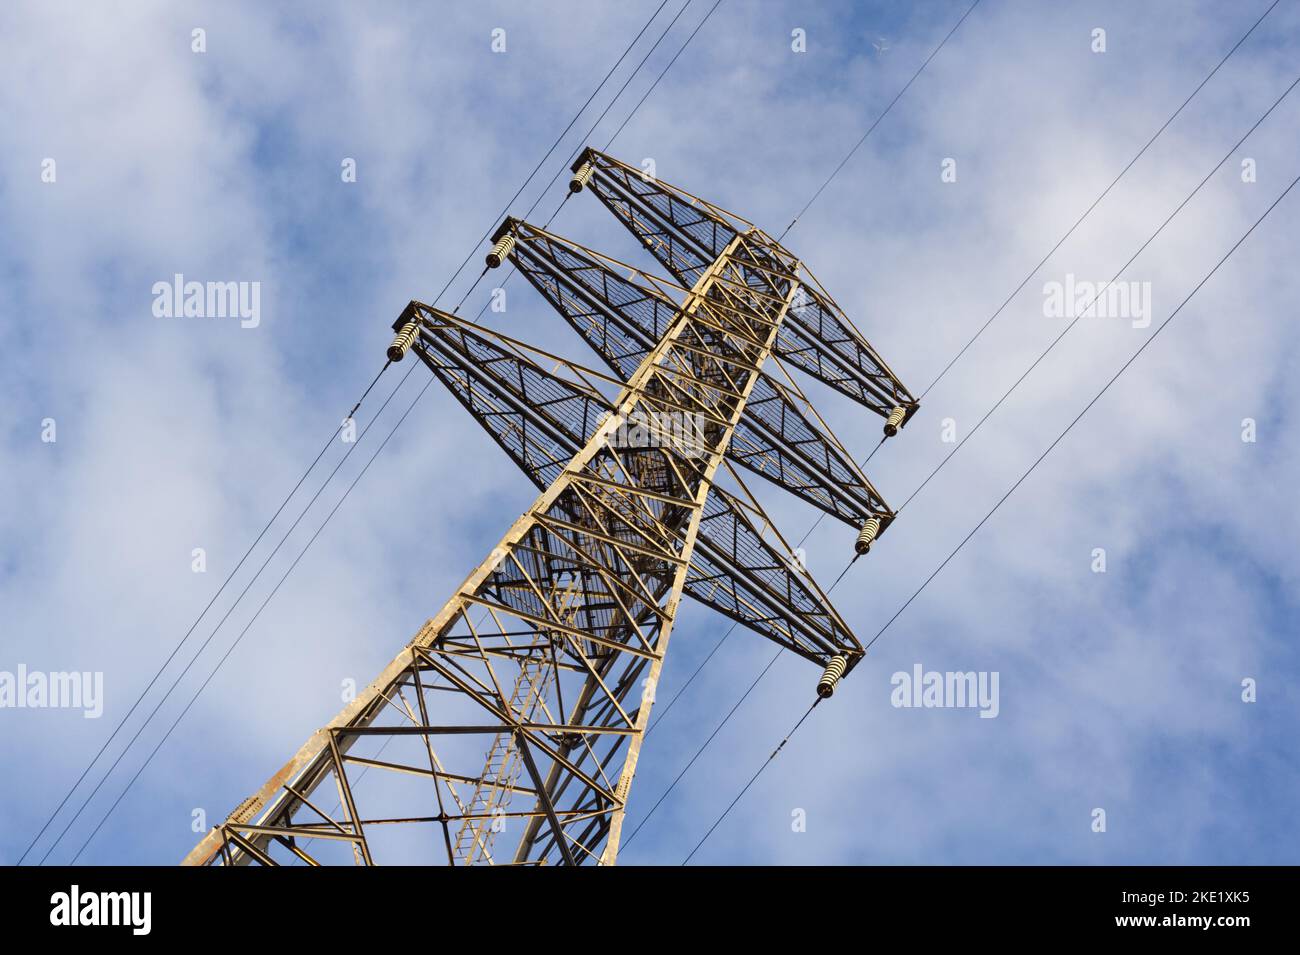 Electricity pylon, or transmission tower, in the UK. Stock Photo